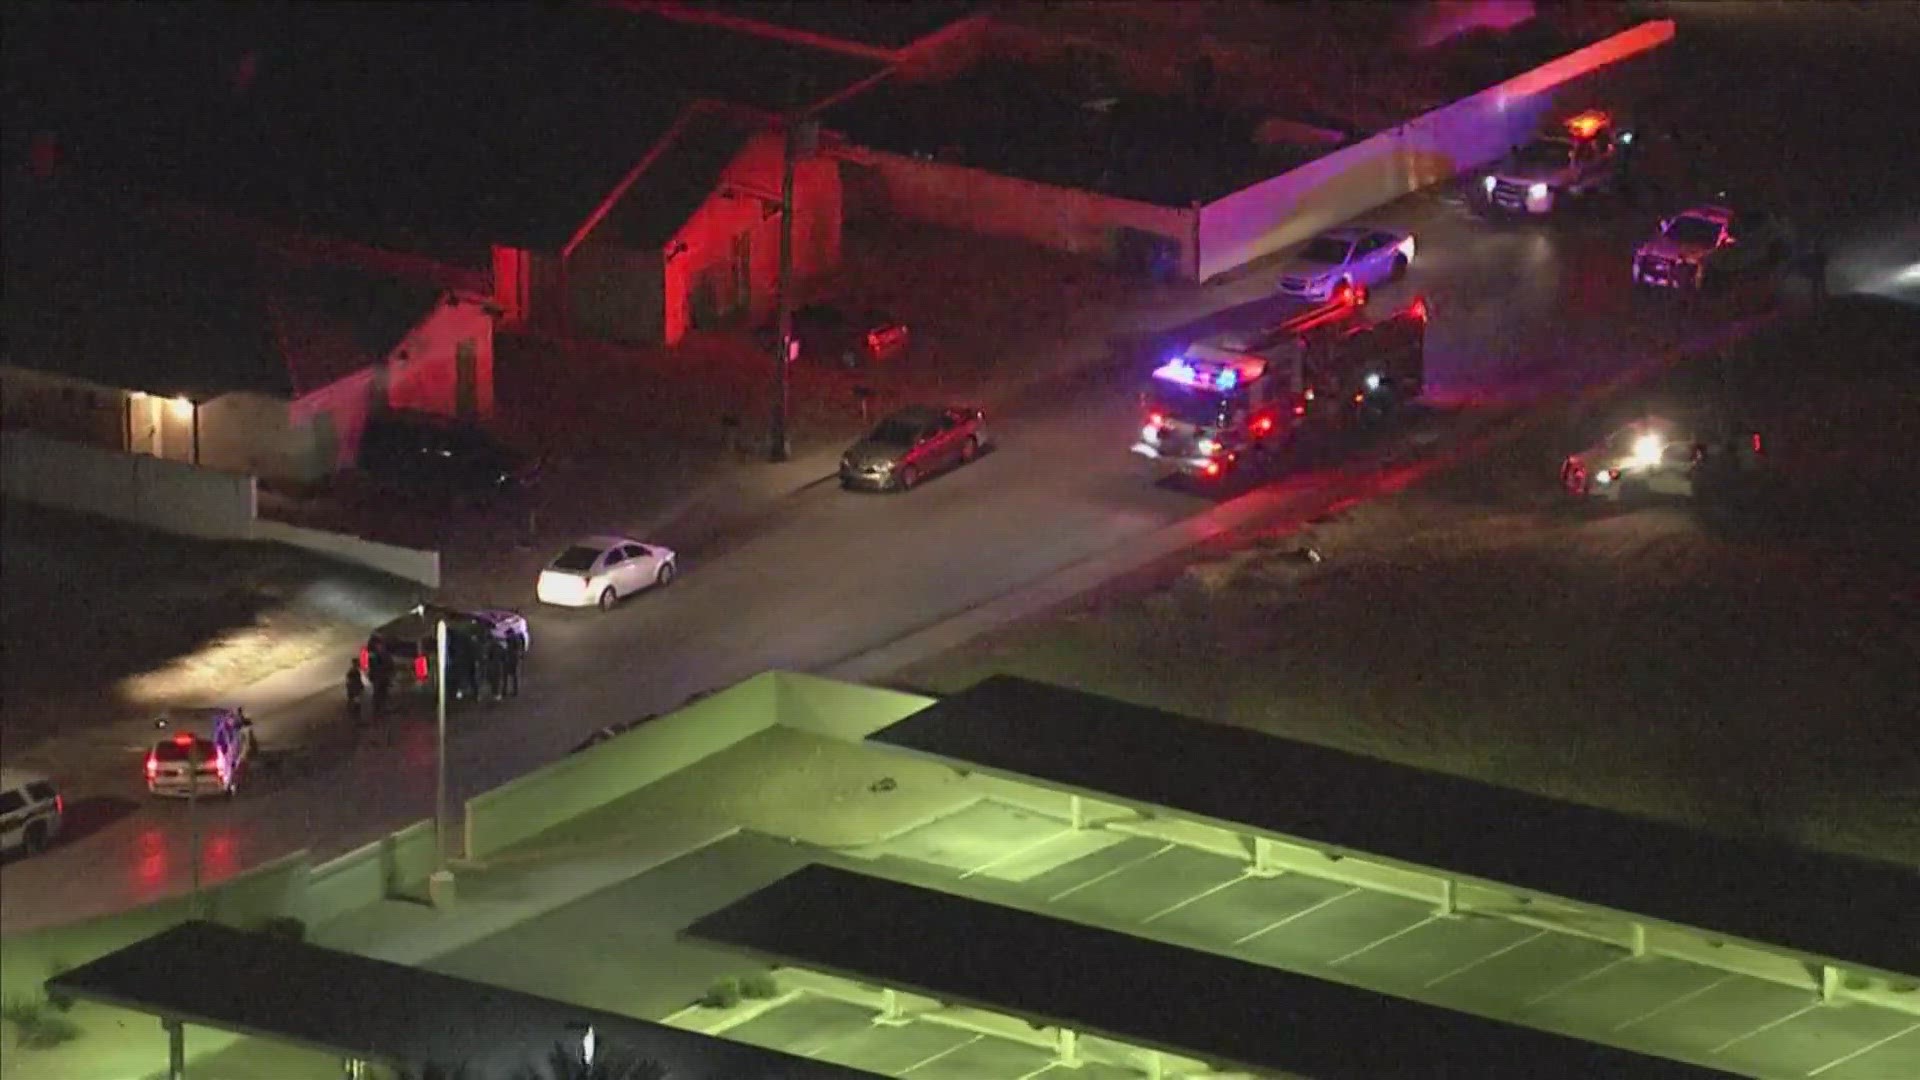 The officer is being treated at a local hospital and is expected to recover, officials said.